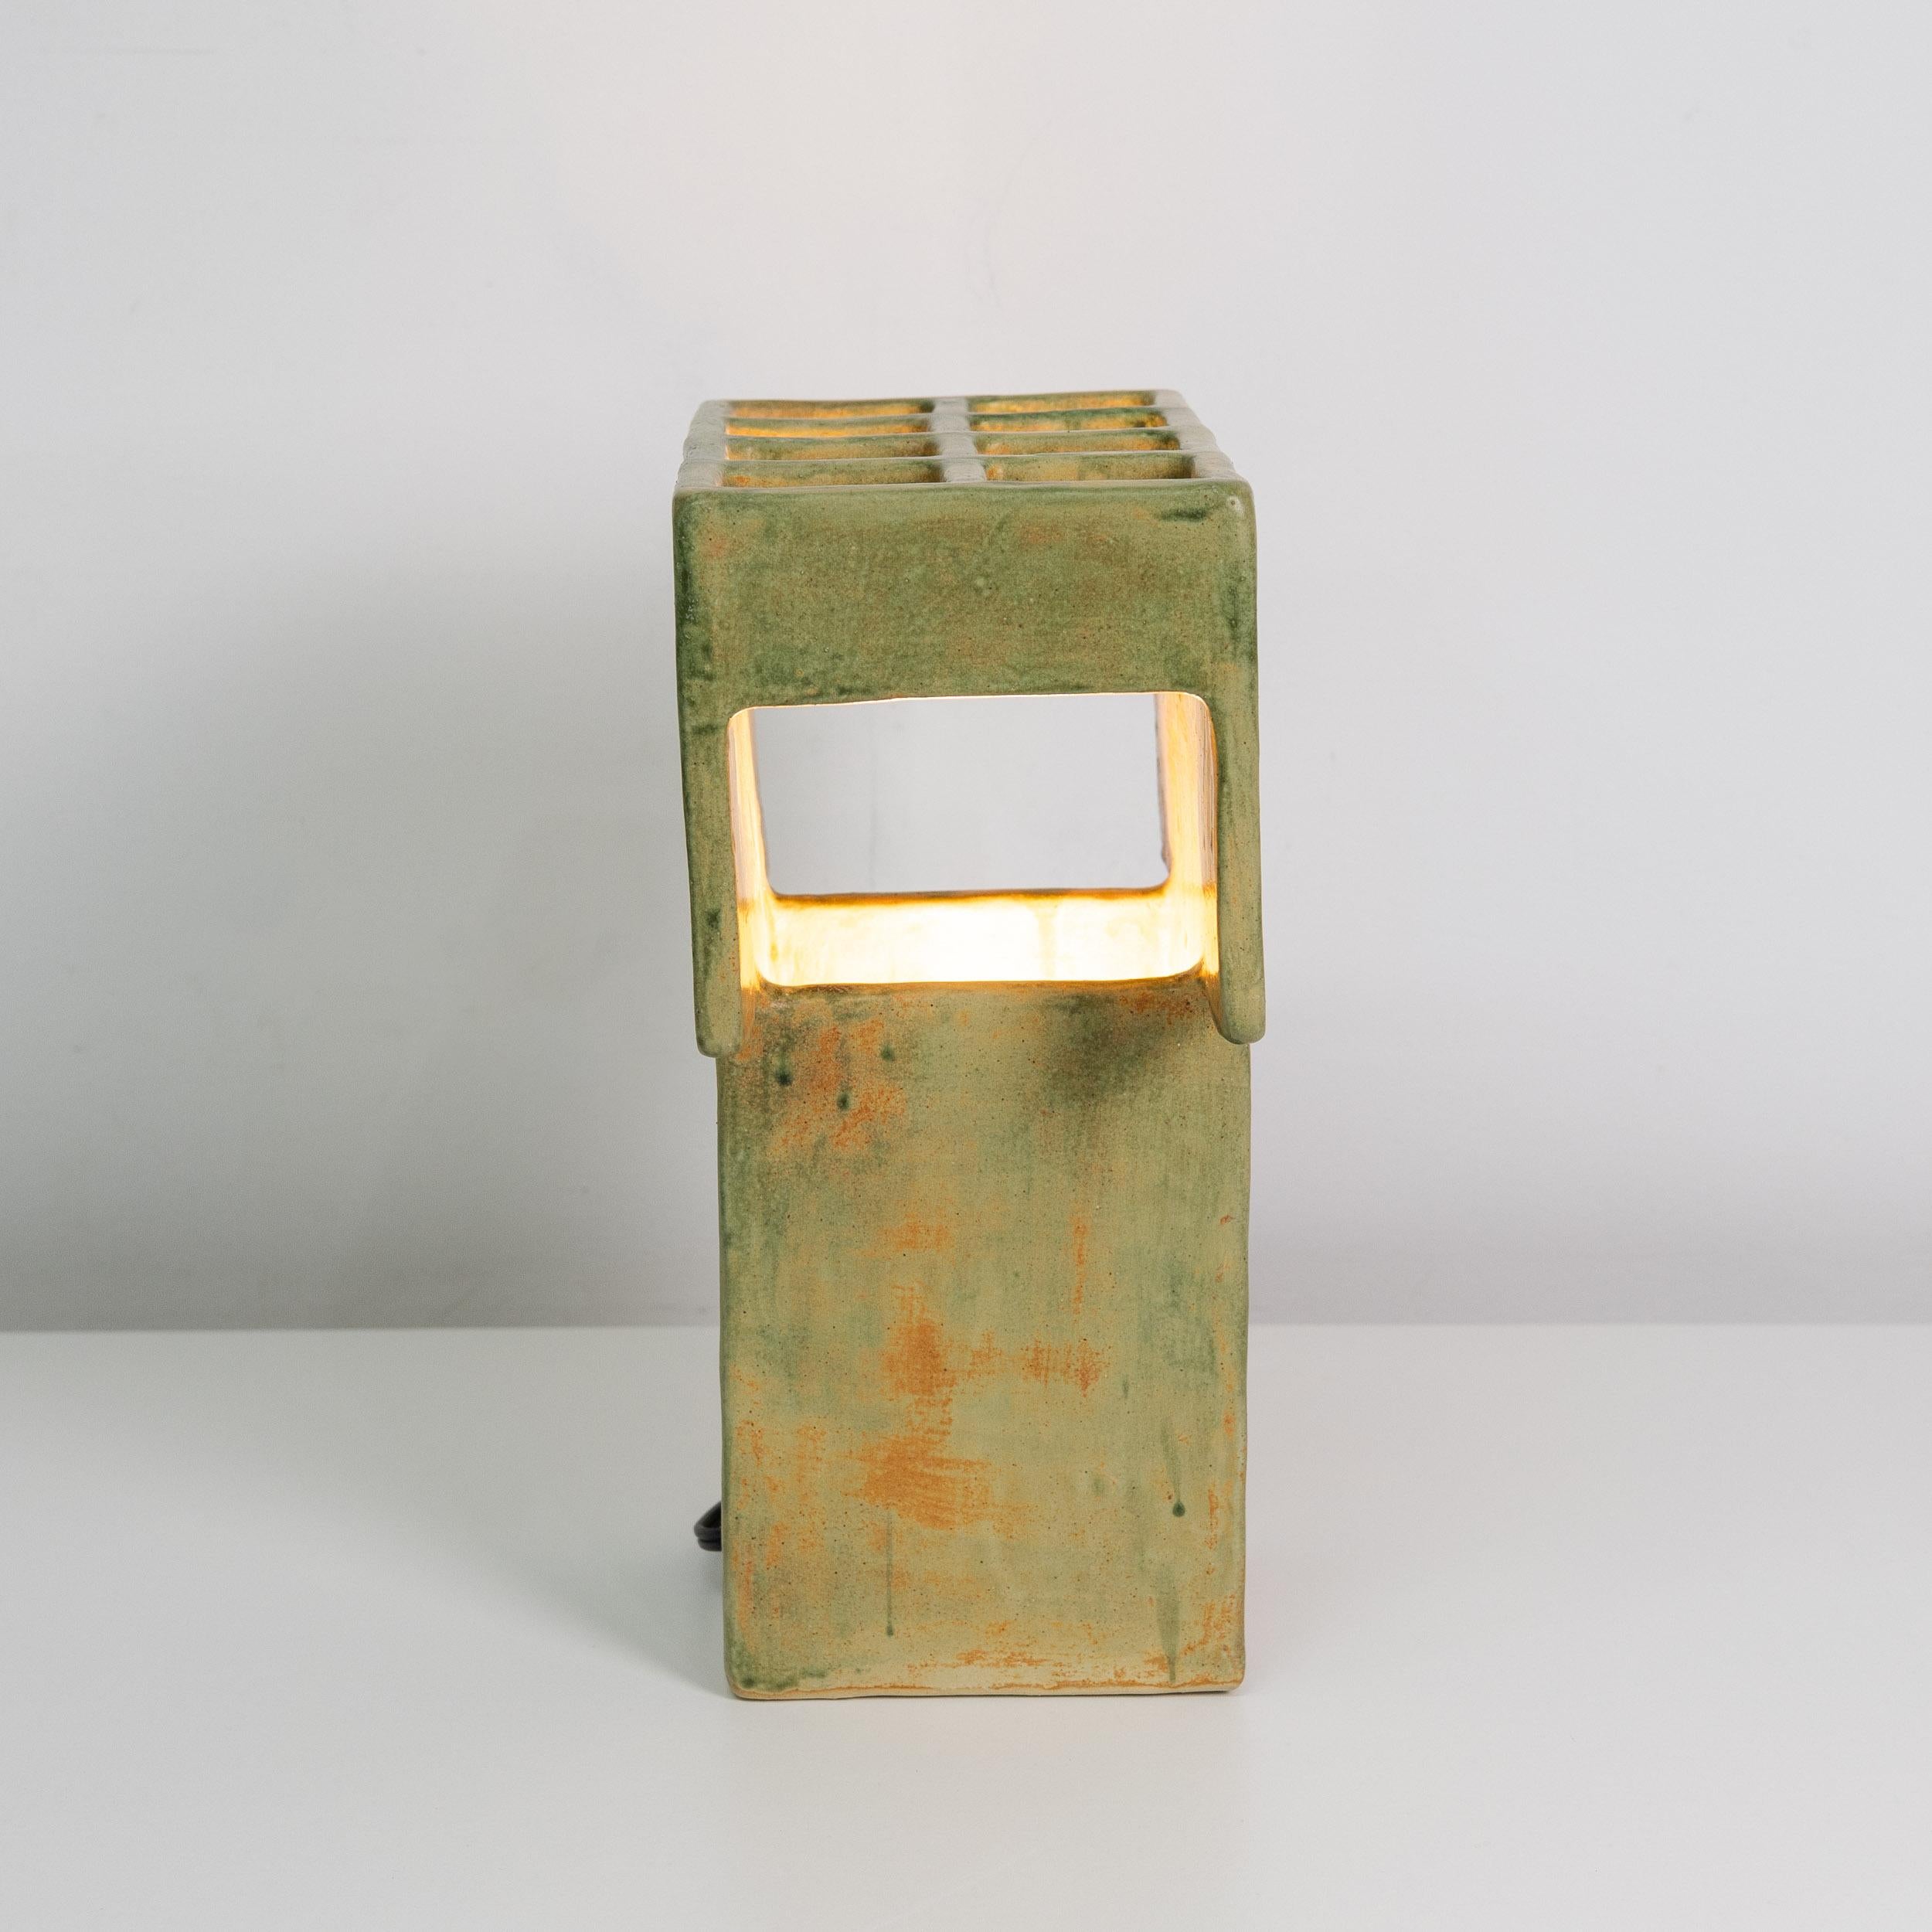 Hand-Crafted Mr. T Ceramic Table Lamp, Geometric, Brutalist, Square Table Light, Clay, Glazed For Sale